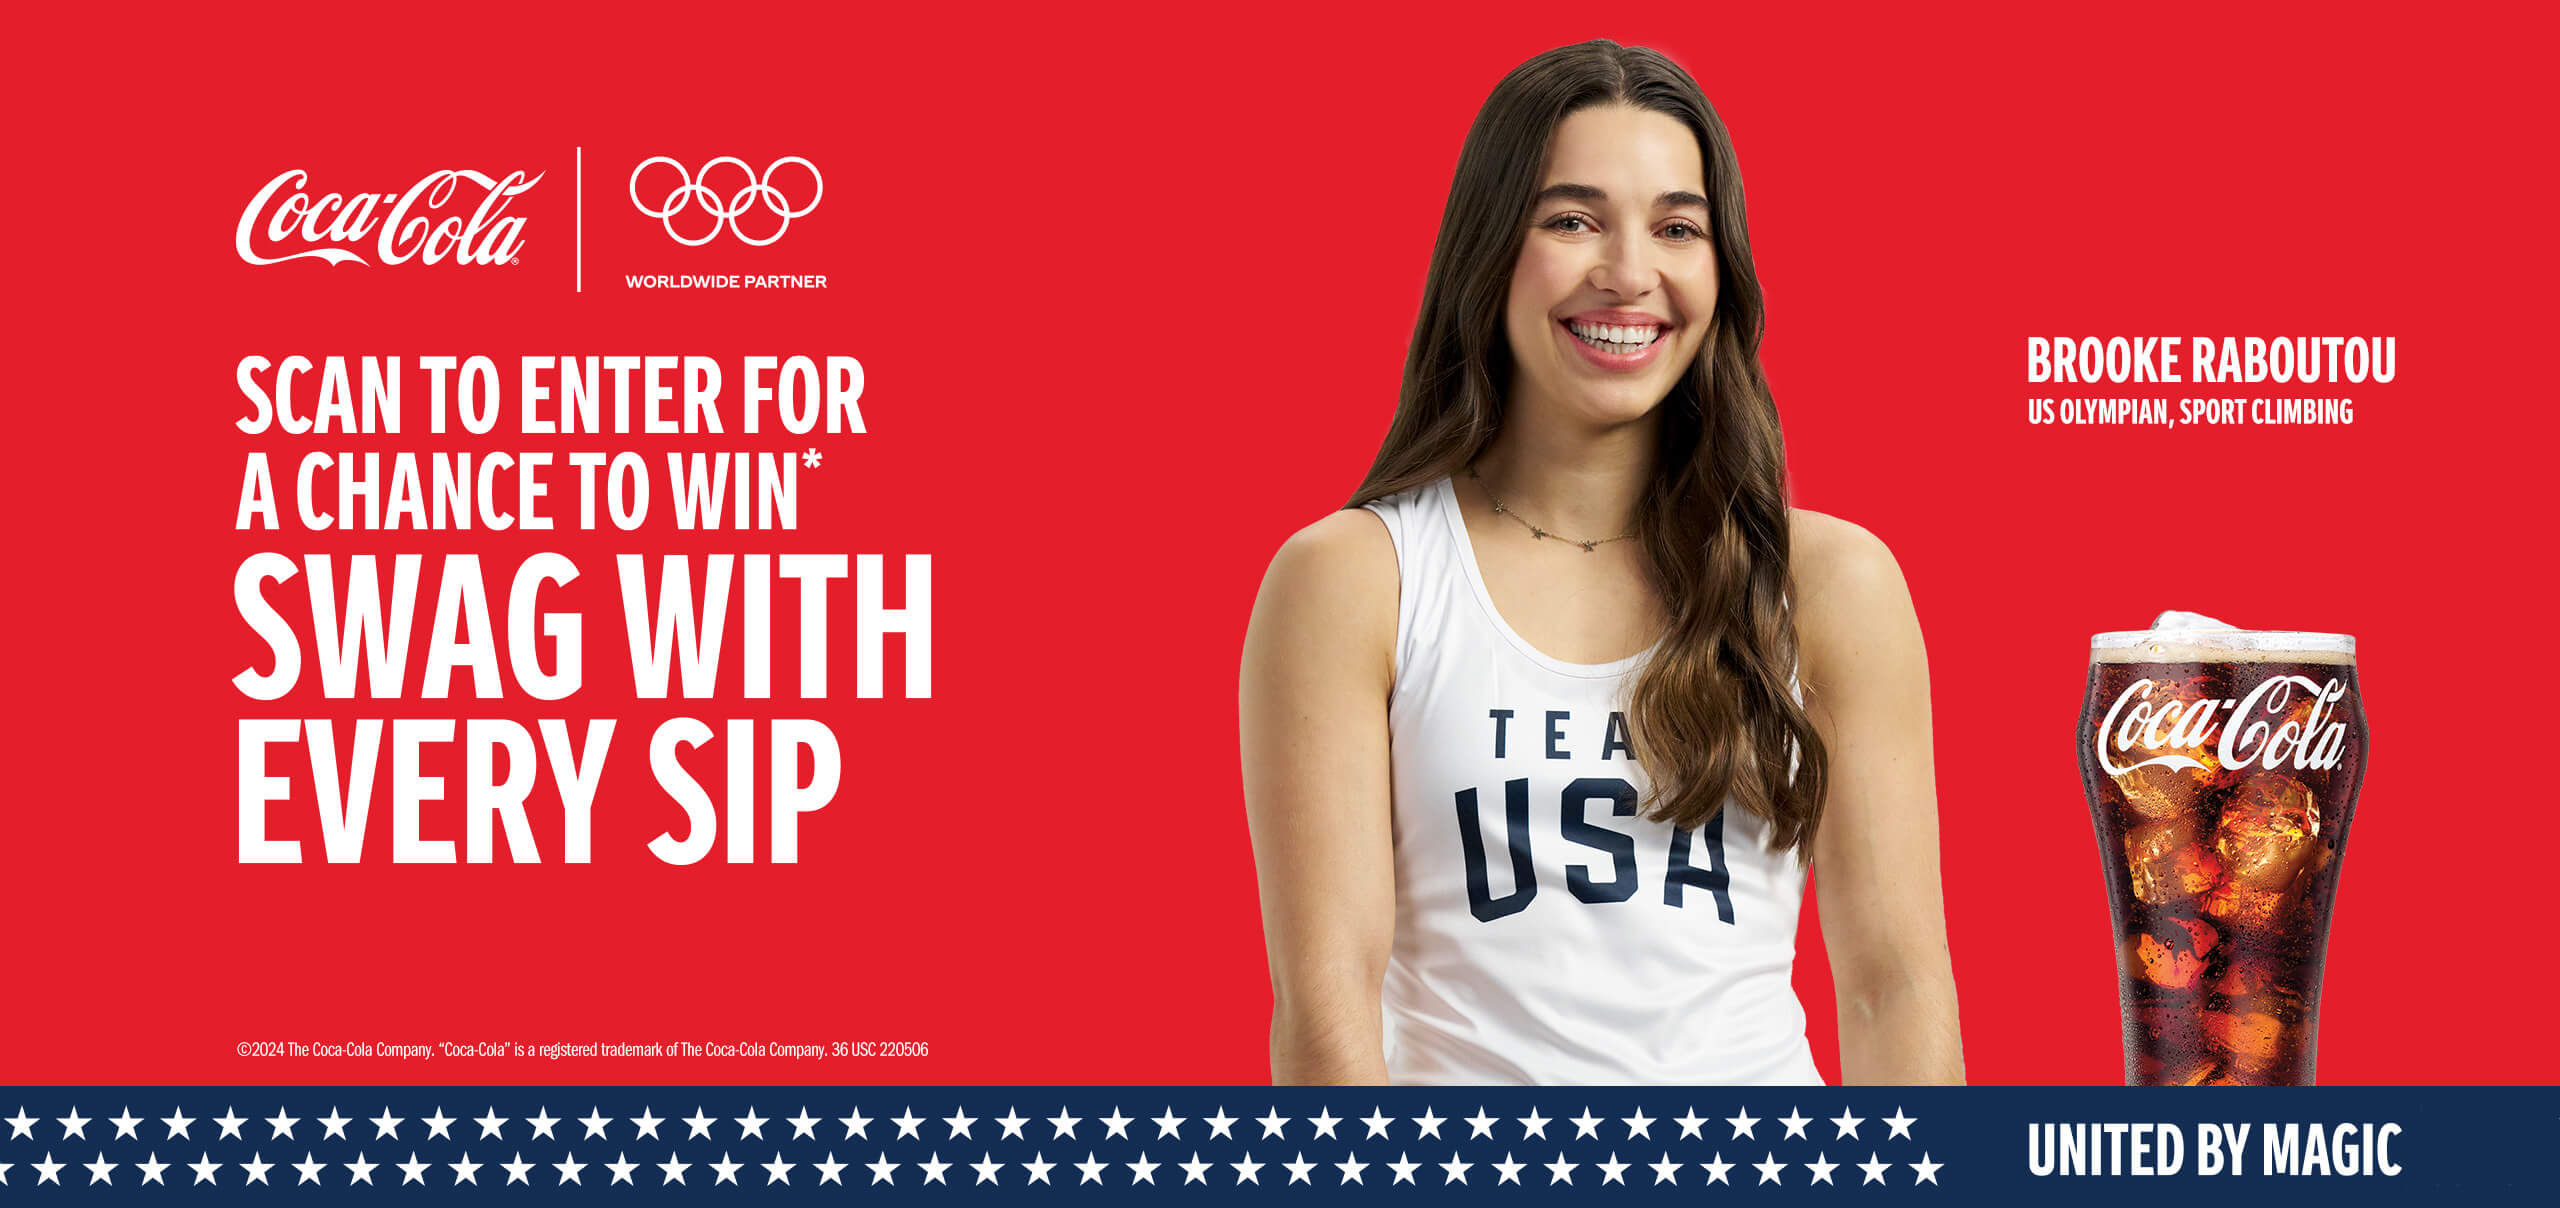 Scan to enter for a chance to win* swag with every sip. Brooke Raboutou, US olympian, Sport climbing.